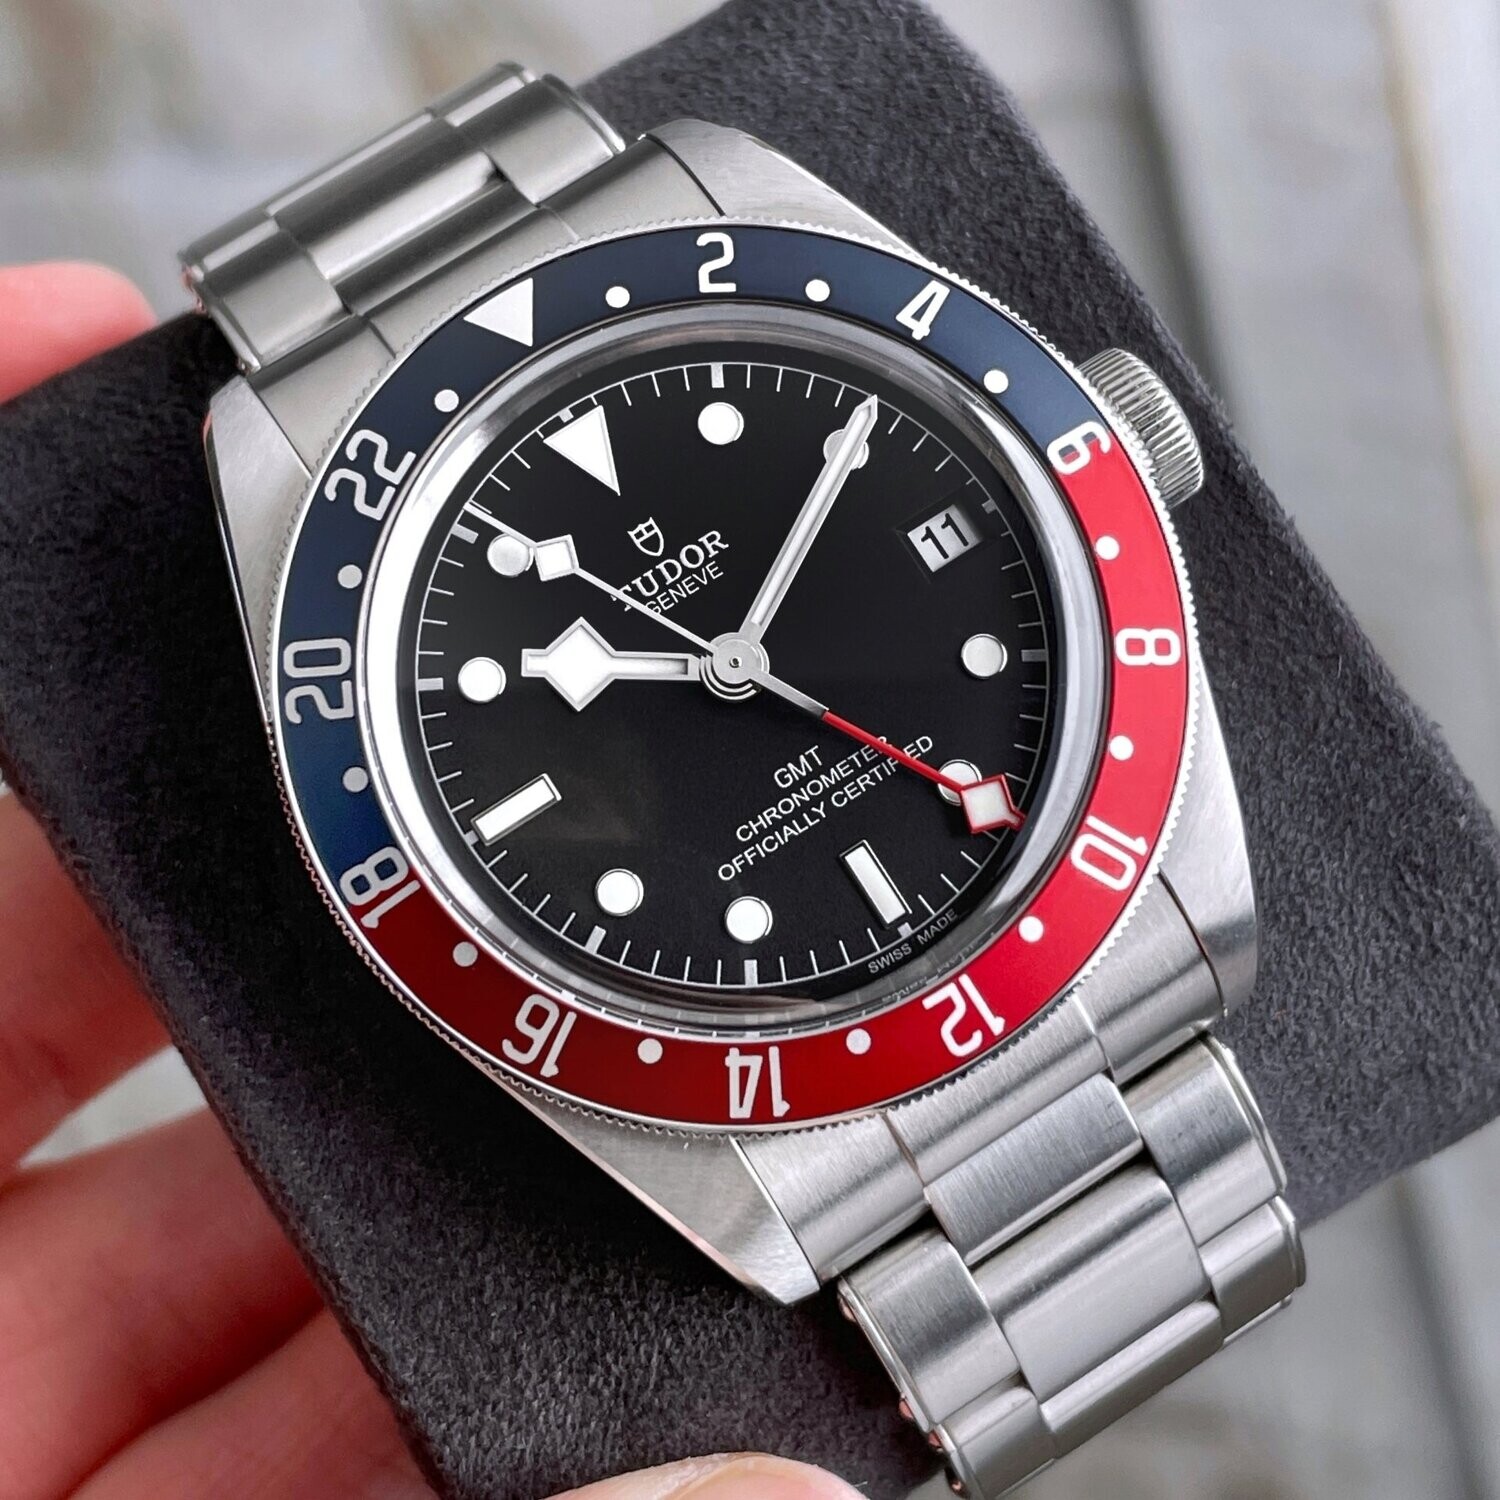 Rolex GMT-Master Pepsi Bezel 40mm 1989 for $11,499 for sale from a Trusted  Seller on Chrono24